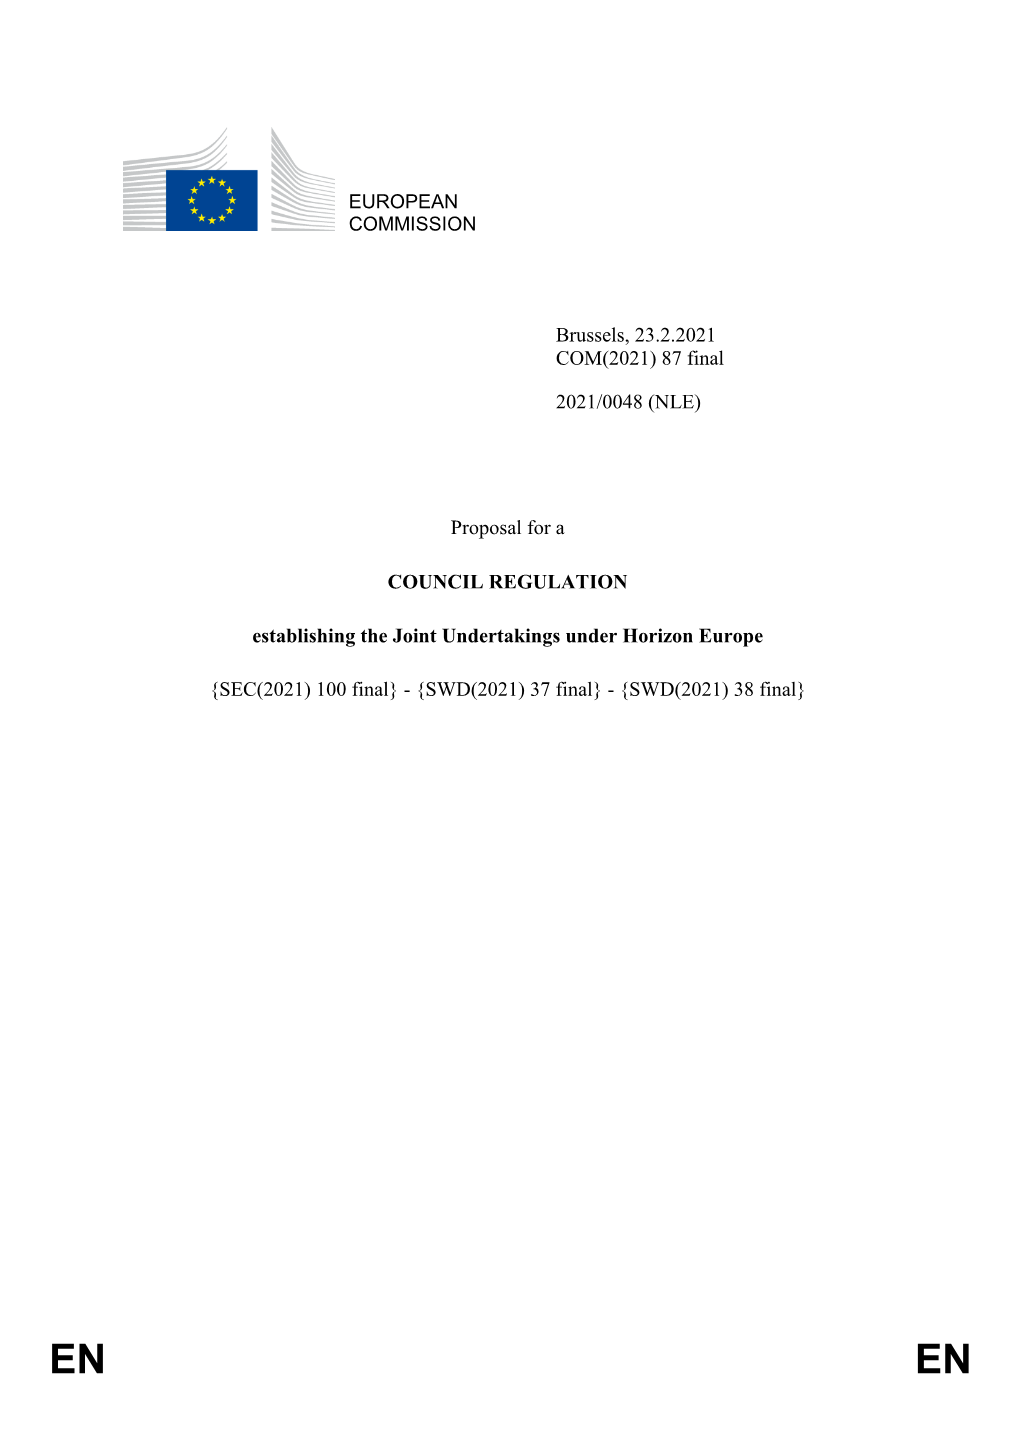 87 Final 2021/0048 (NLE) Proposal for a COUNCIL REGULATION